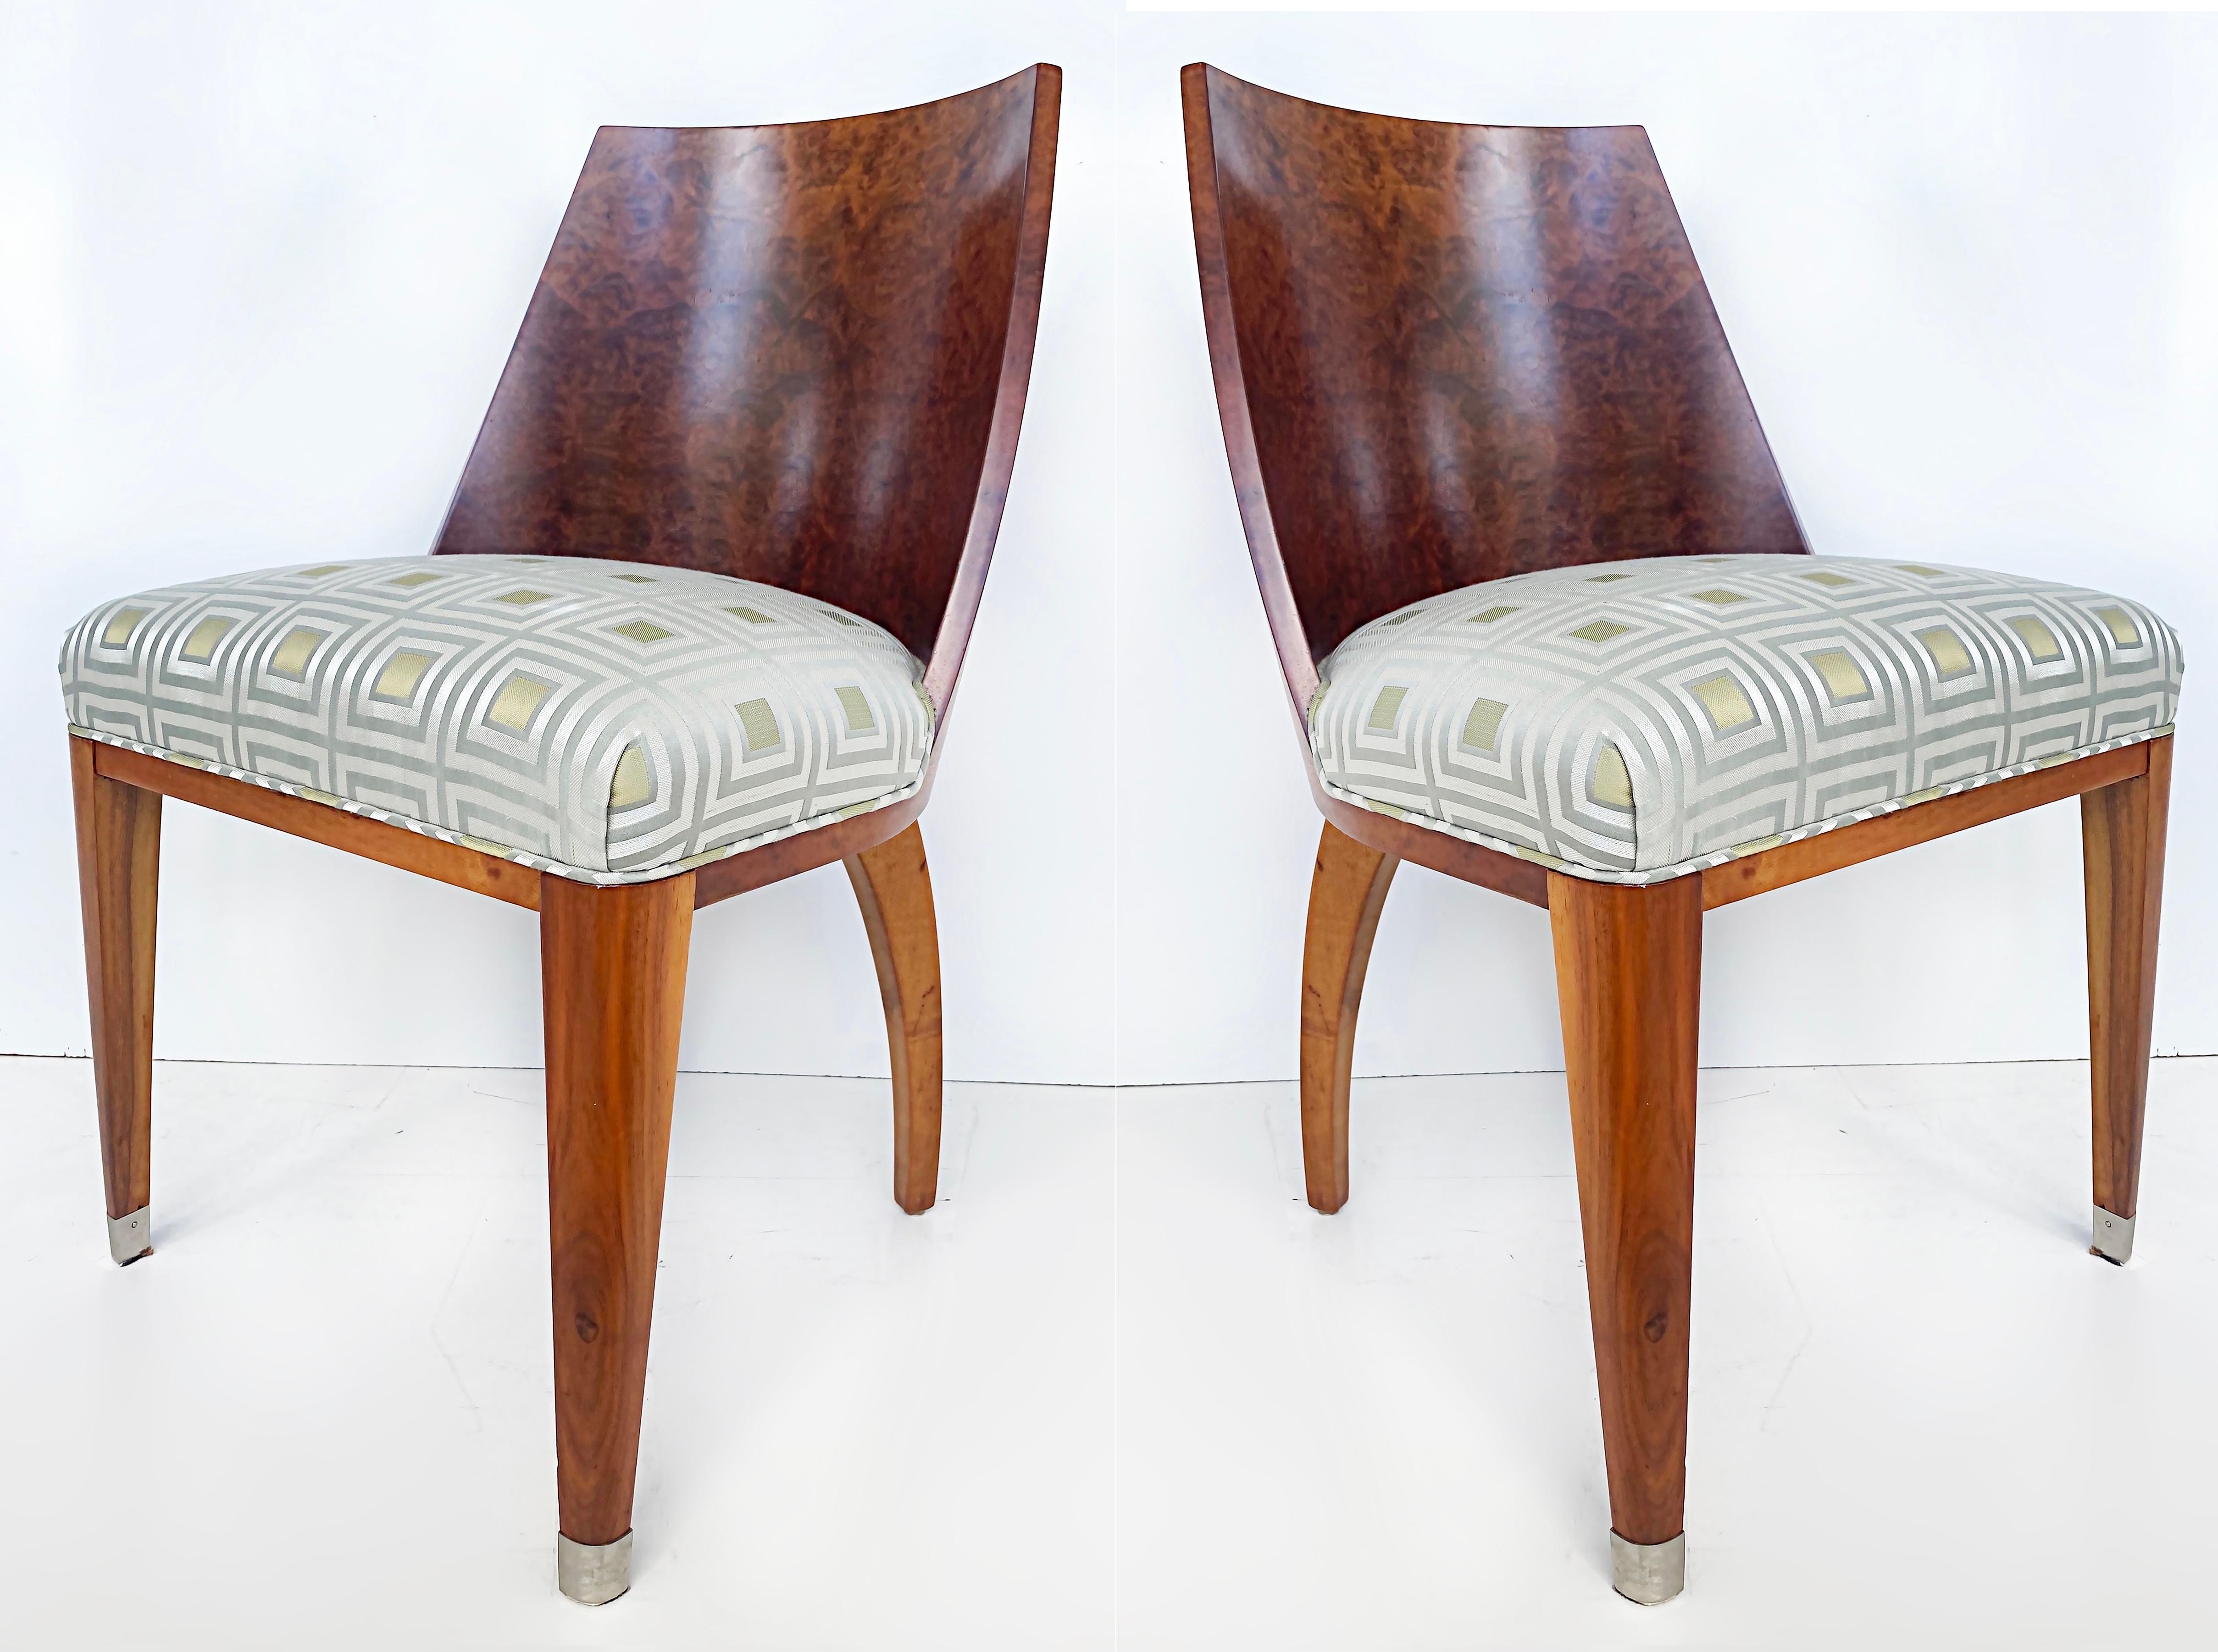 Rinck Paris French Art Deco burlwood dining chairs, Set of 8 circa 1930.

Offered for sale in a set of eight French Art Deco dining chairs designed and manufactured by Rinck of Paris c1930. These chairs are documented by the Rinck Paris archivist